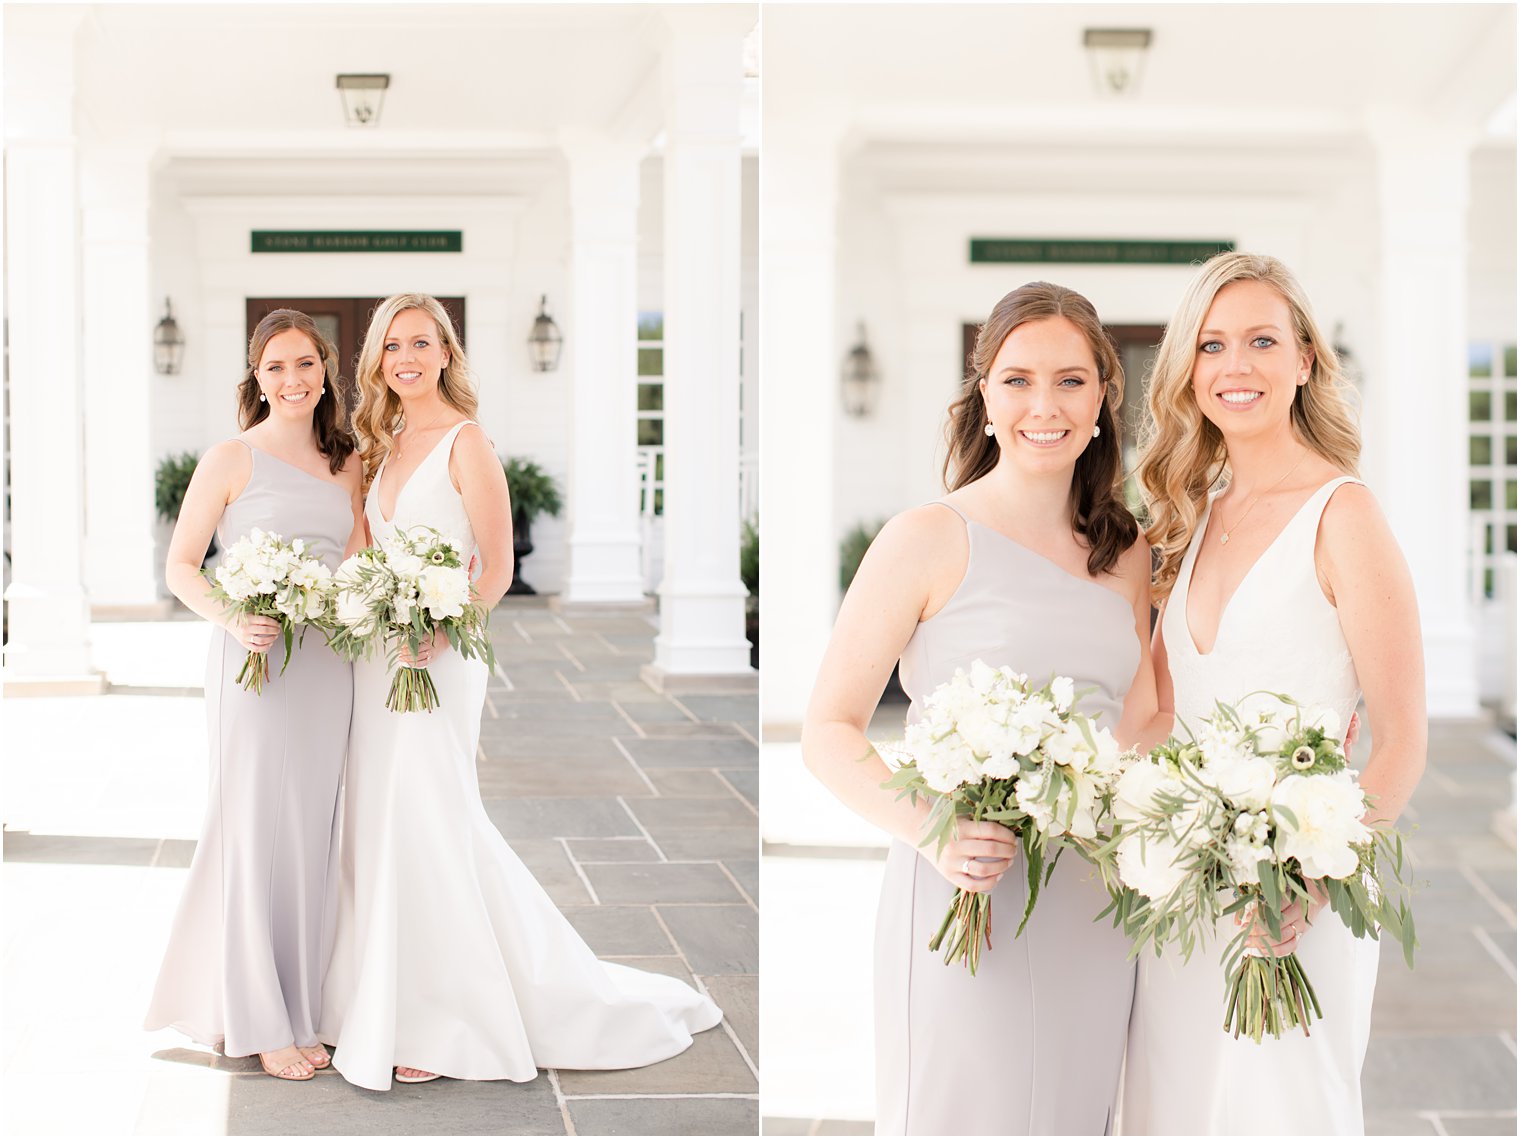 Portraits of bride and bridesmaids at Stone Harbor Yacht Club